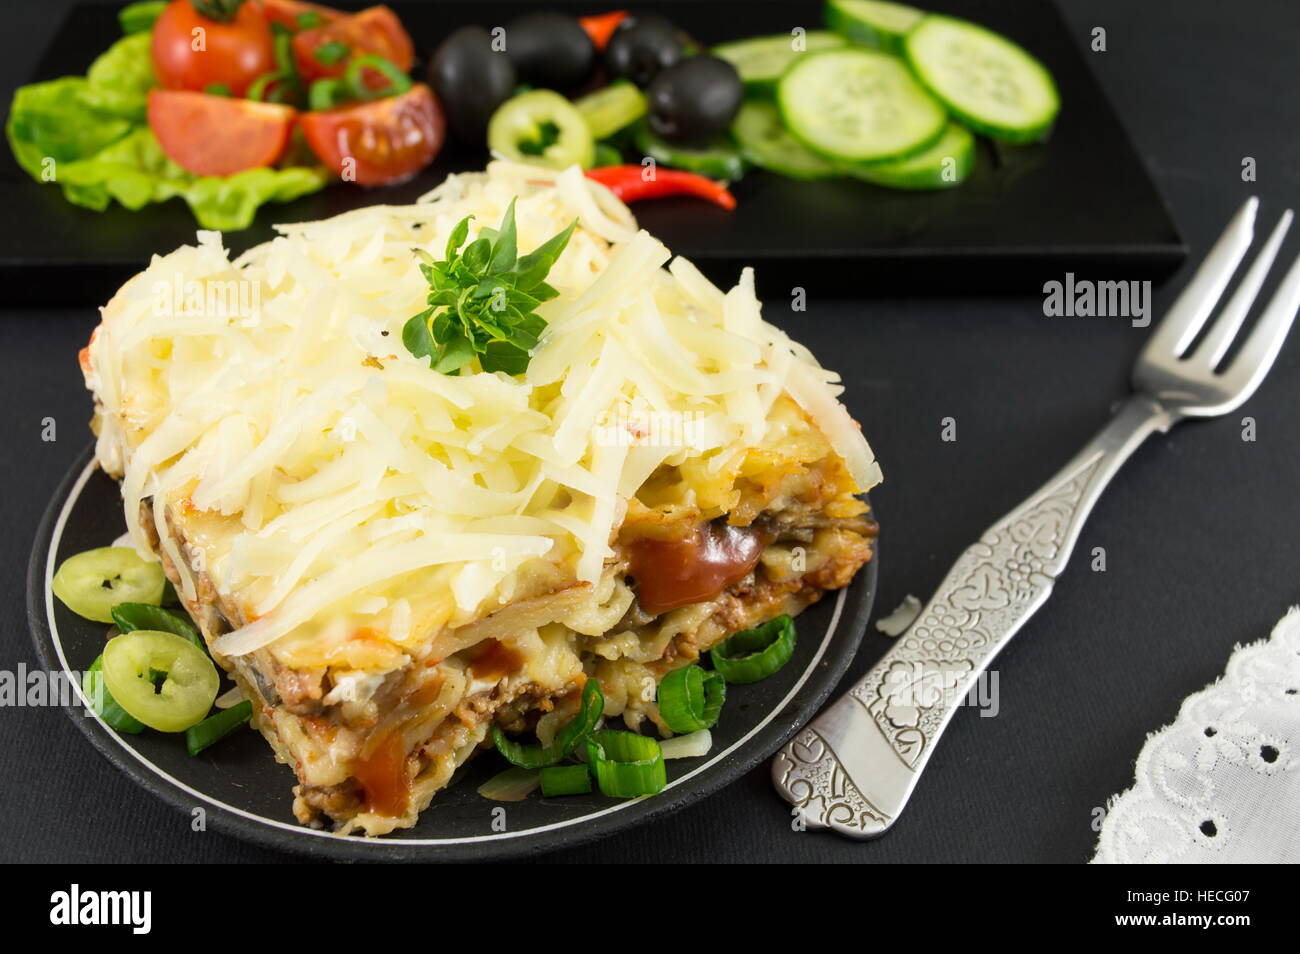 Portion of lasagna with vegetables on a dark table Stock Photo